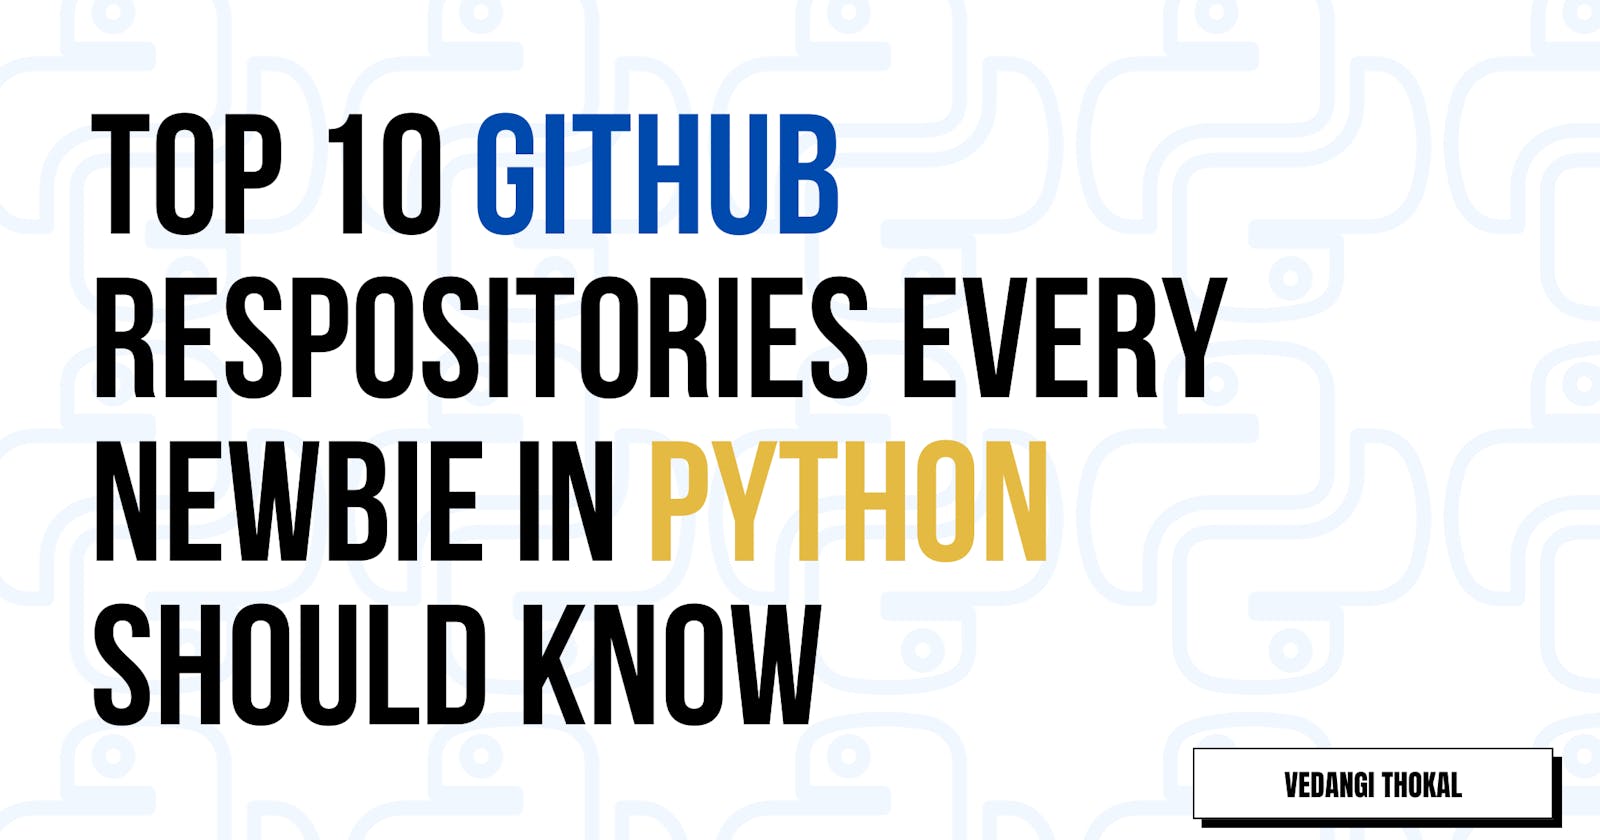 Top GitHub Resources to Level Up Your Python game